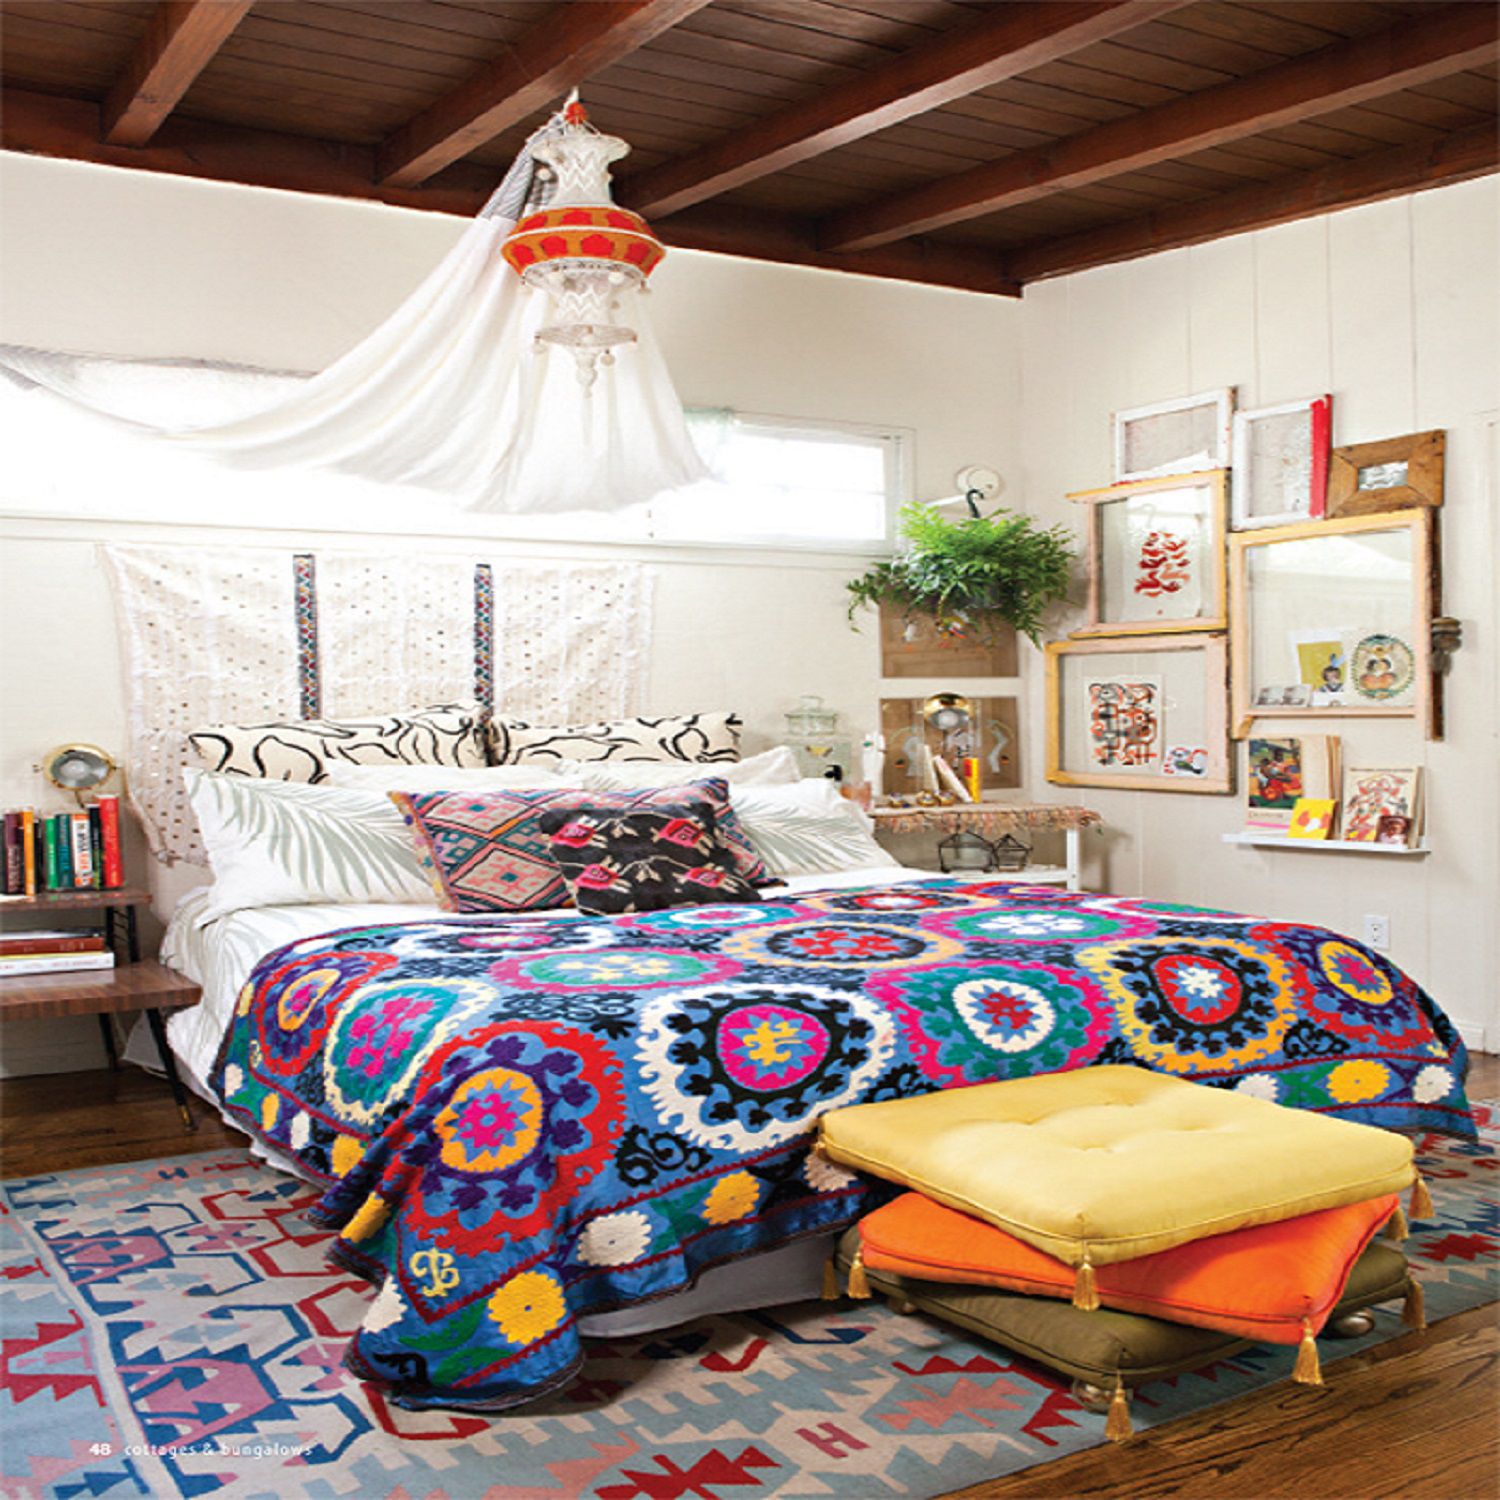 Creatice Boho Bed Ideas for Small Space